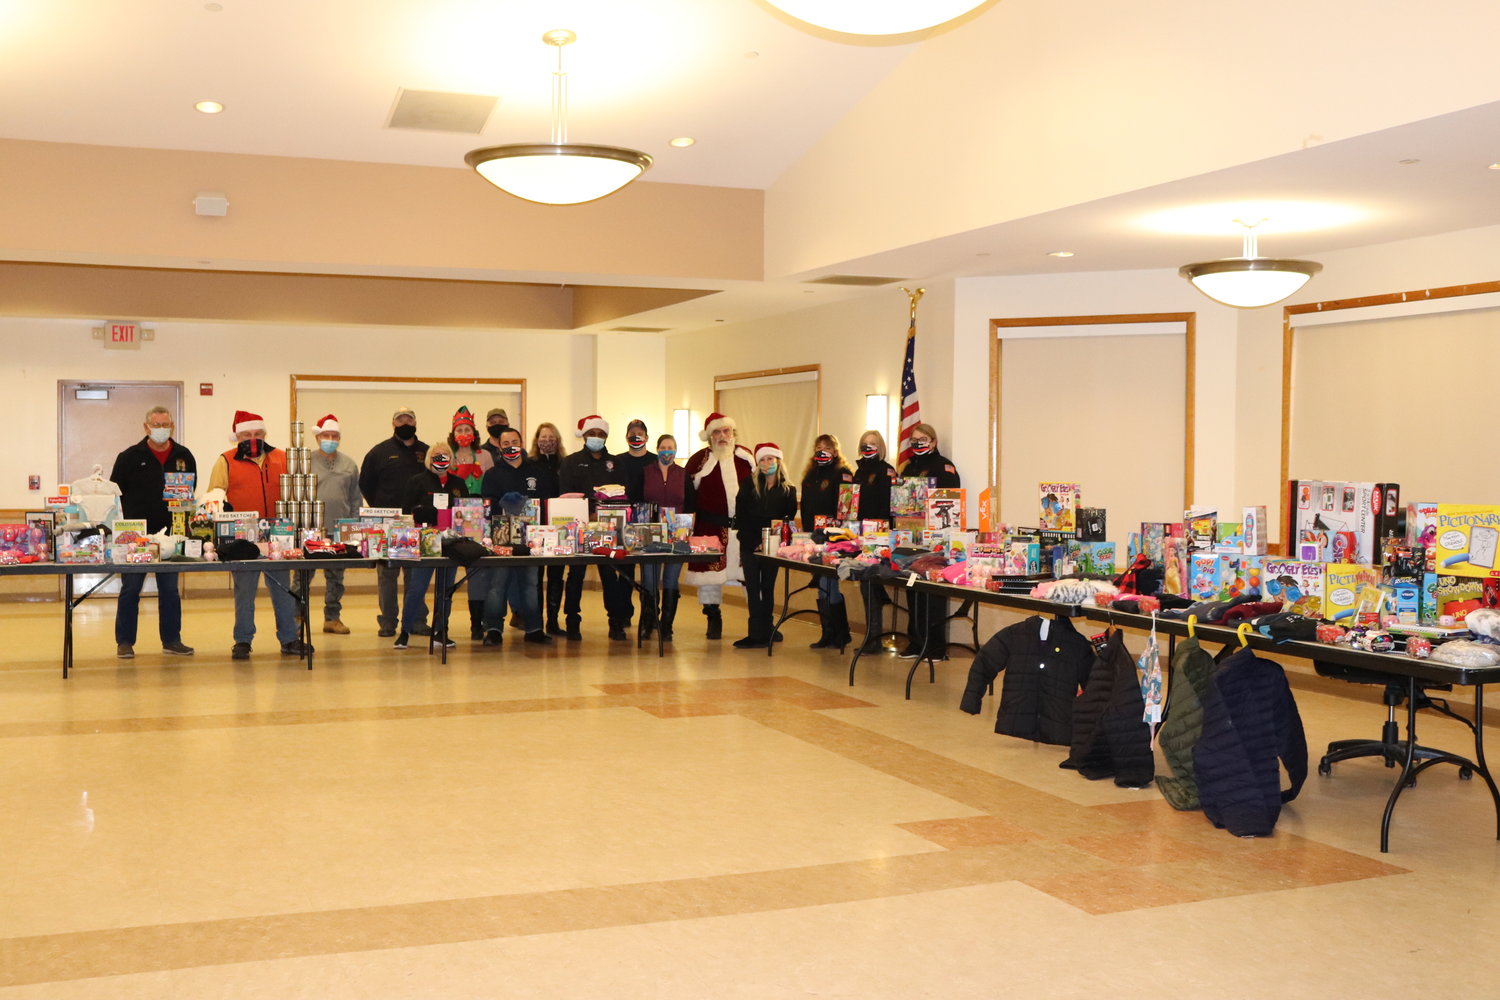 The toy drive provided approximately 250 gifts to 29 families with a total of 53 children.